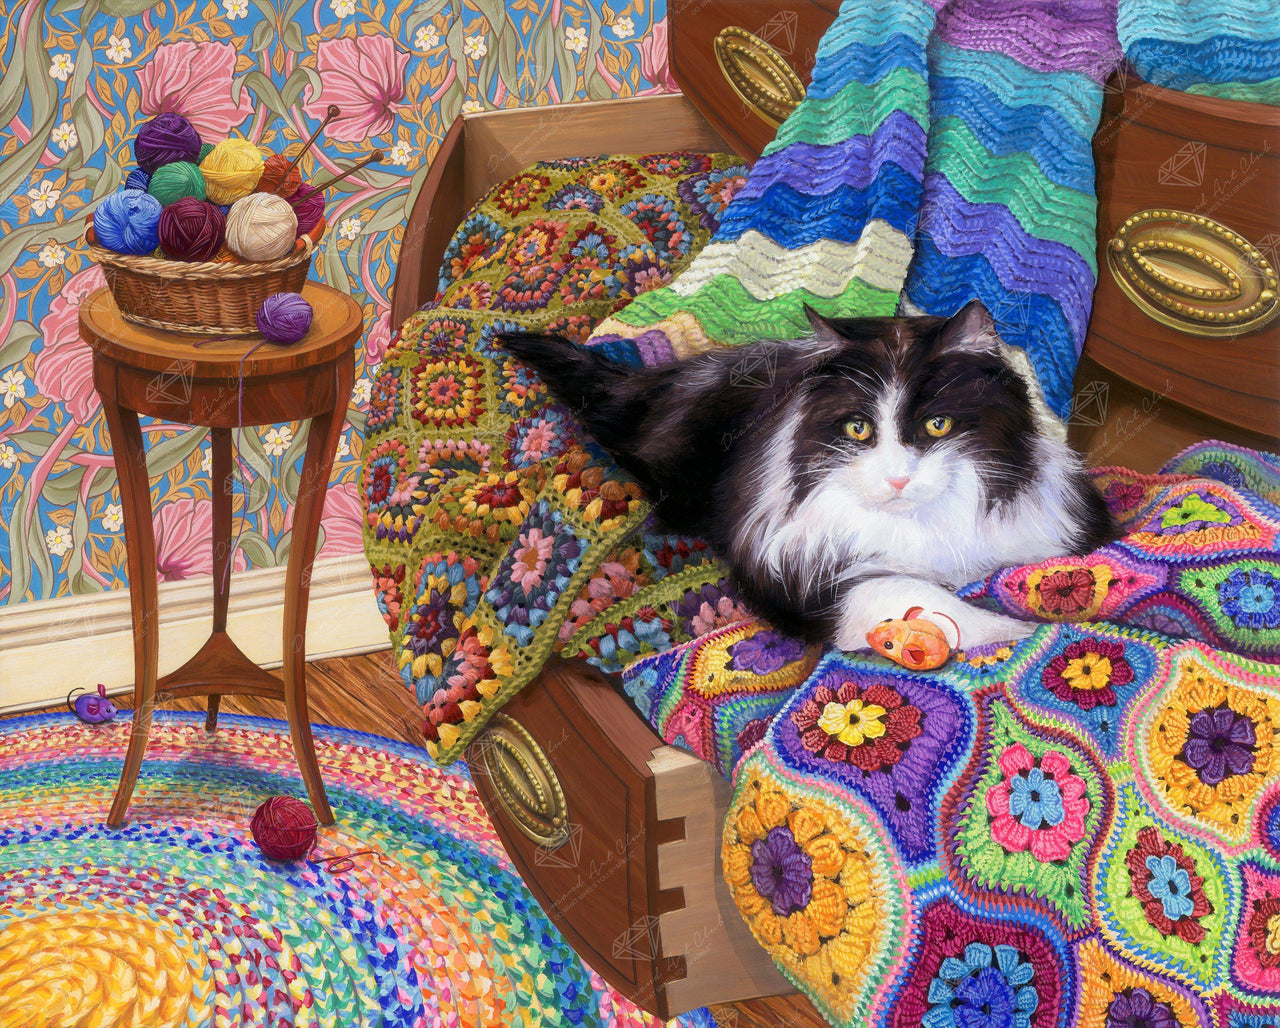 Diamond Painting Afghan Cat 34.3" x 27.6″ (87cm x 70cm) / Square with 57 Colors including 4 ABs / 95,565